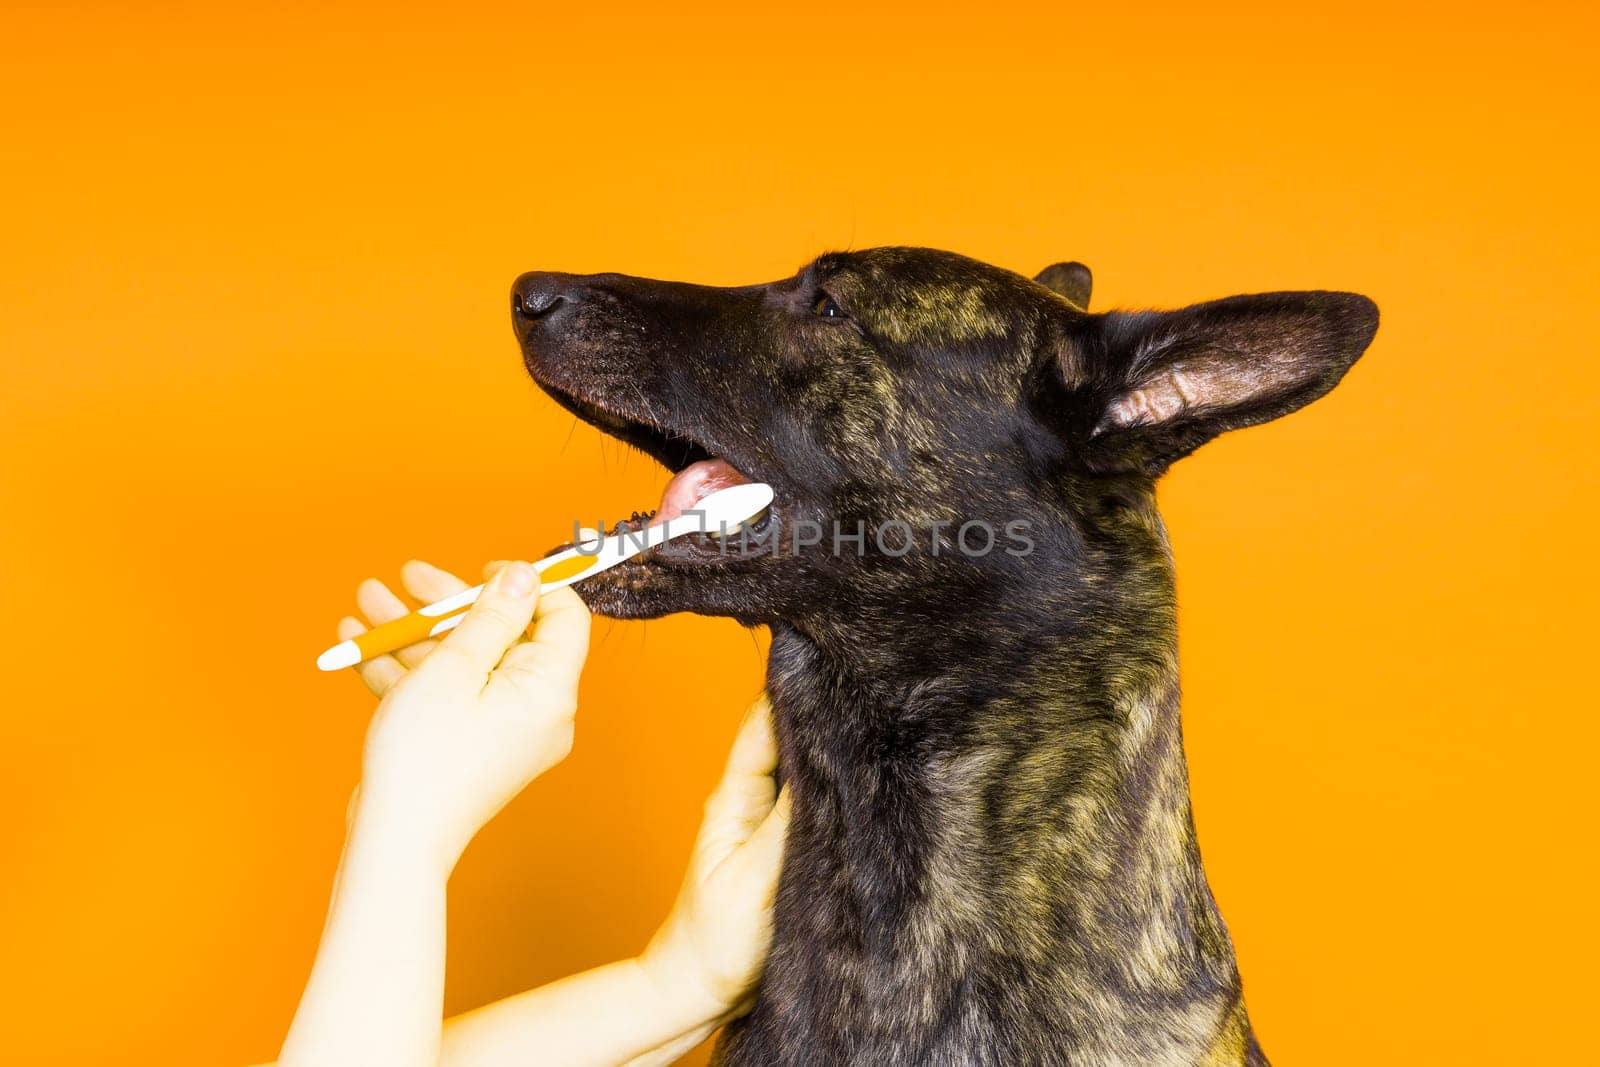 Dog holding a toothbrush in his teeth on a clean red yellow background by Zelenin